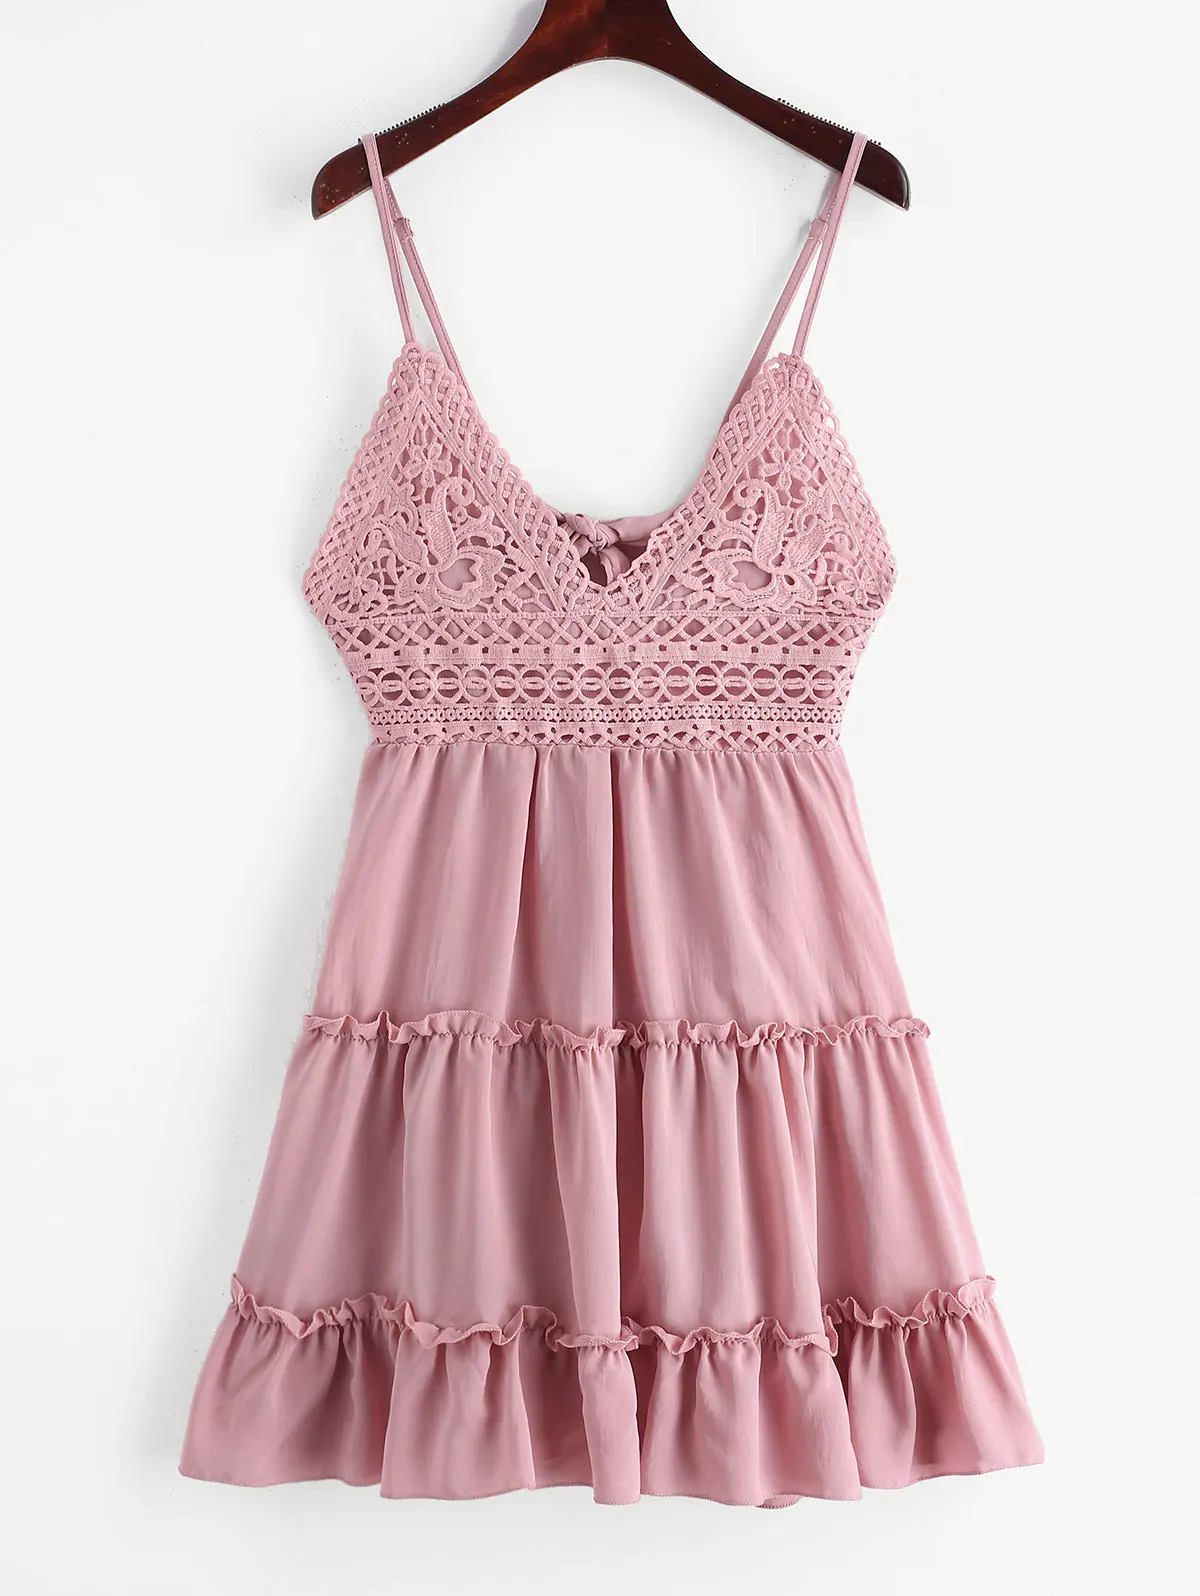 

ZAFUL Sexy Crochet Cami Flare Dress Ruffle Knotted Back Summer Women Dresses Female Clothes Vacation Mini Strap Tie A-Line Dress